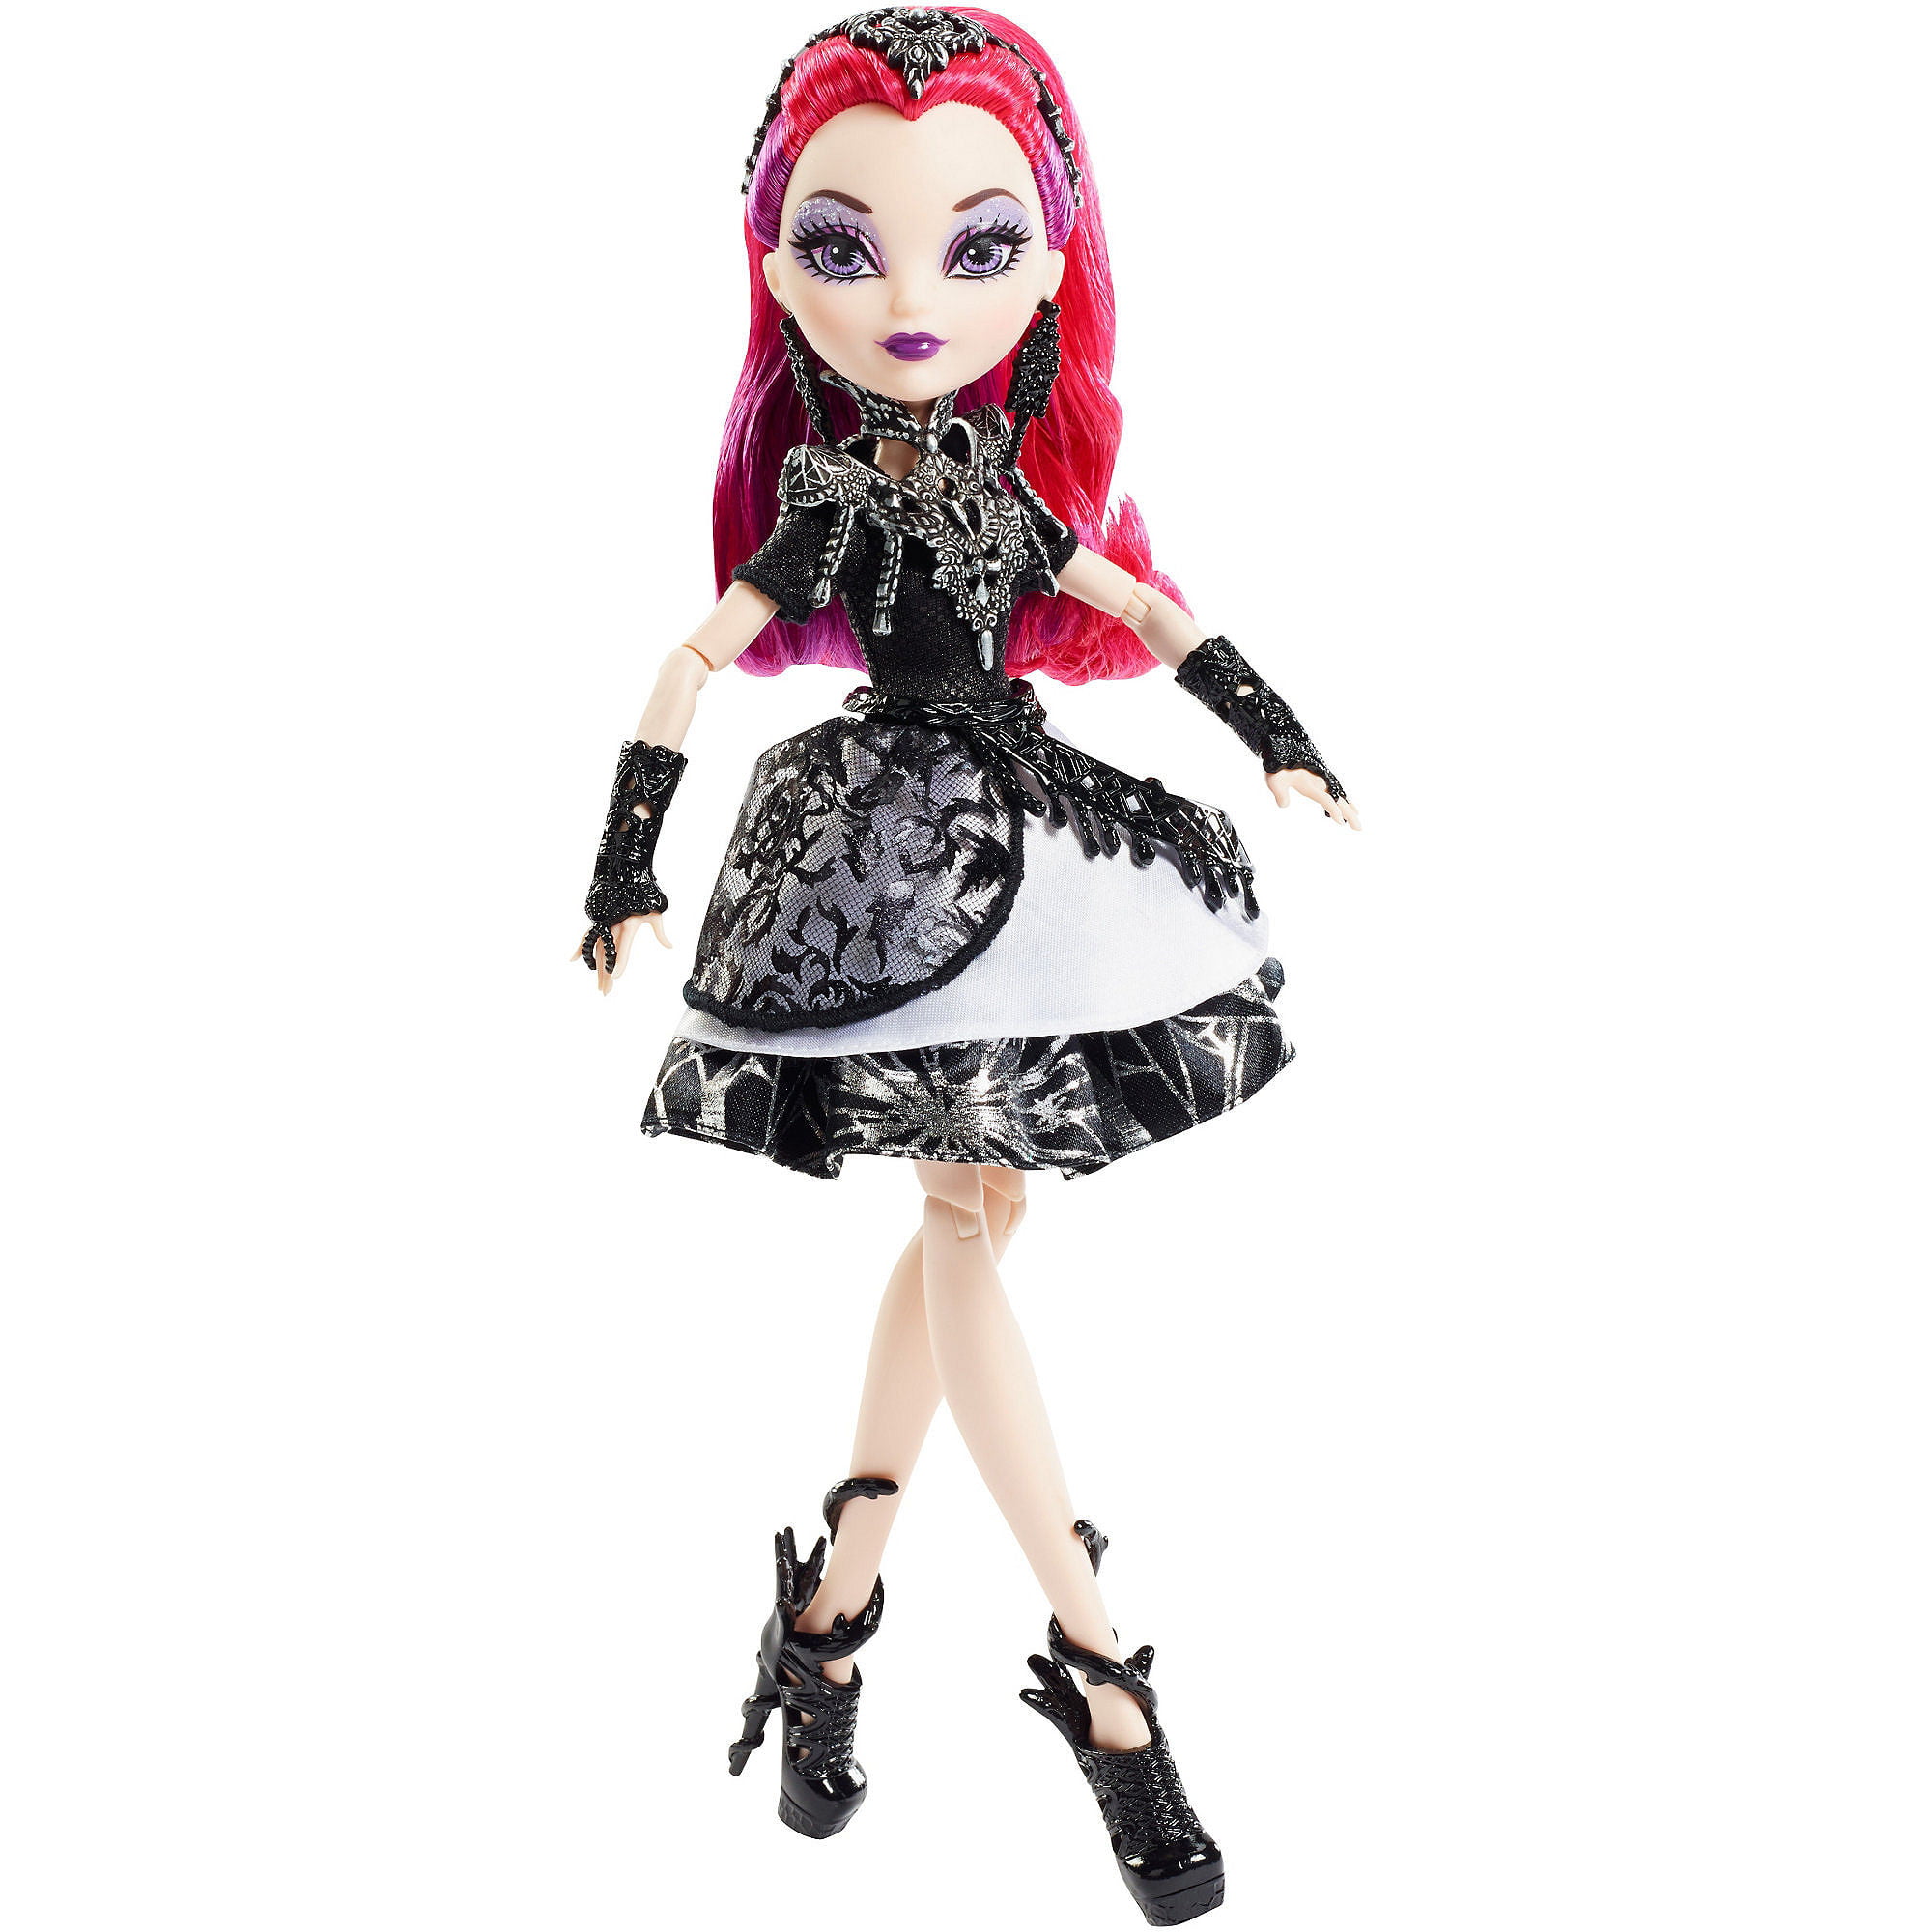 where to buy ever after high dolls